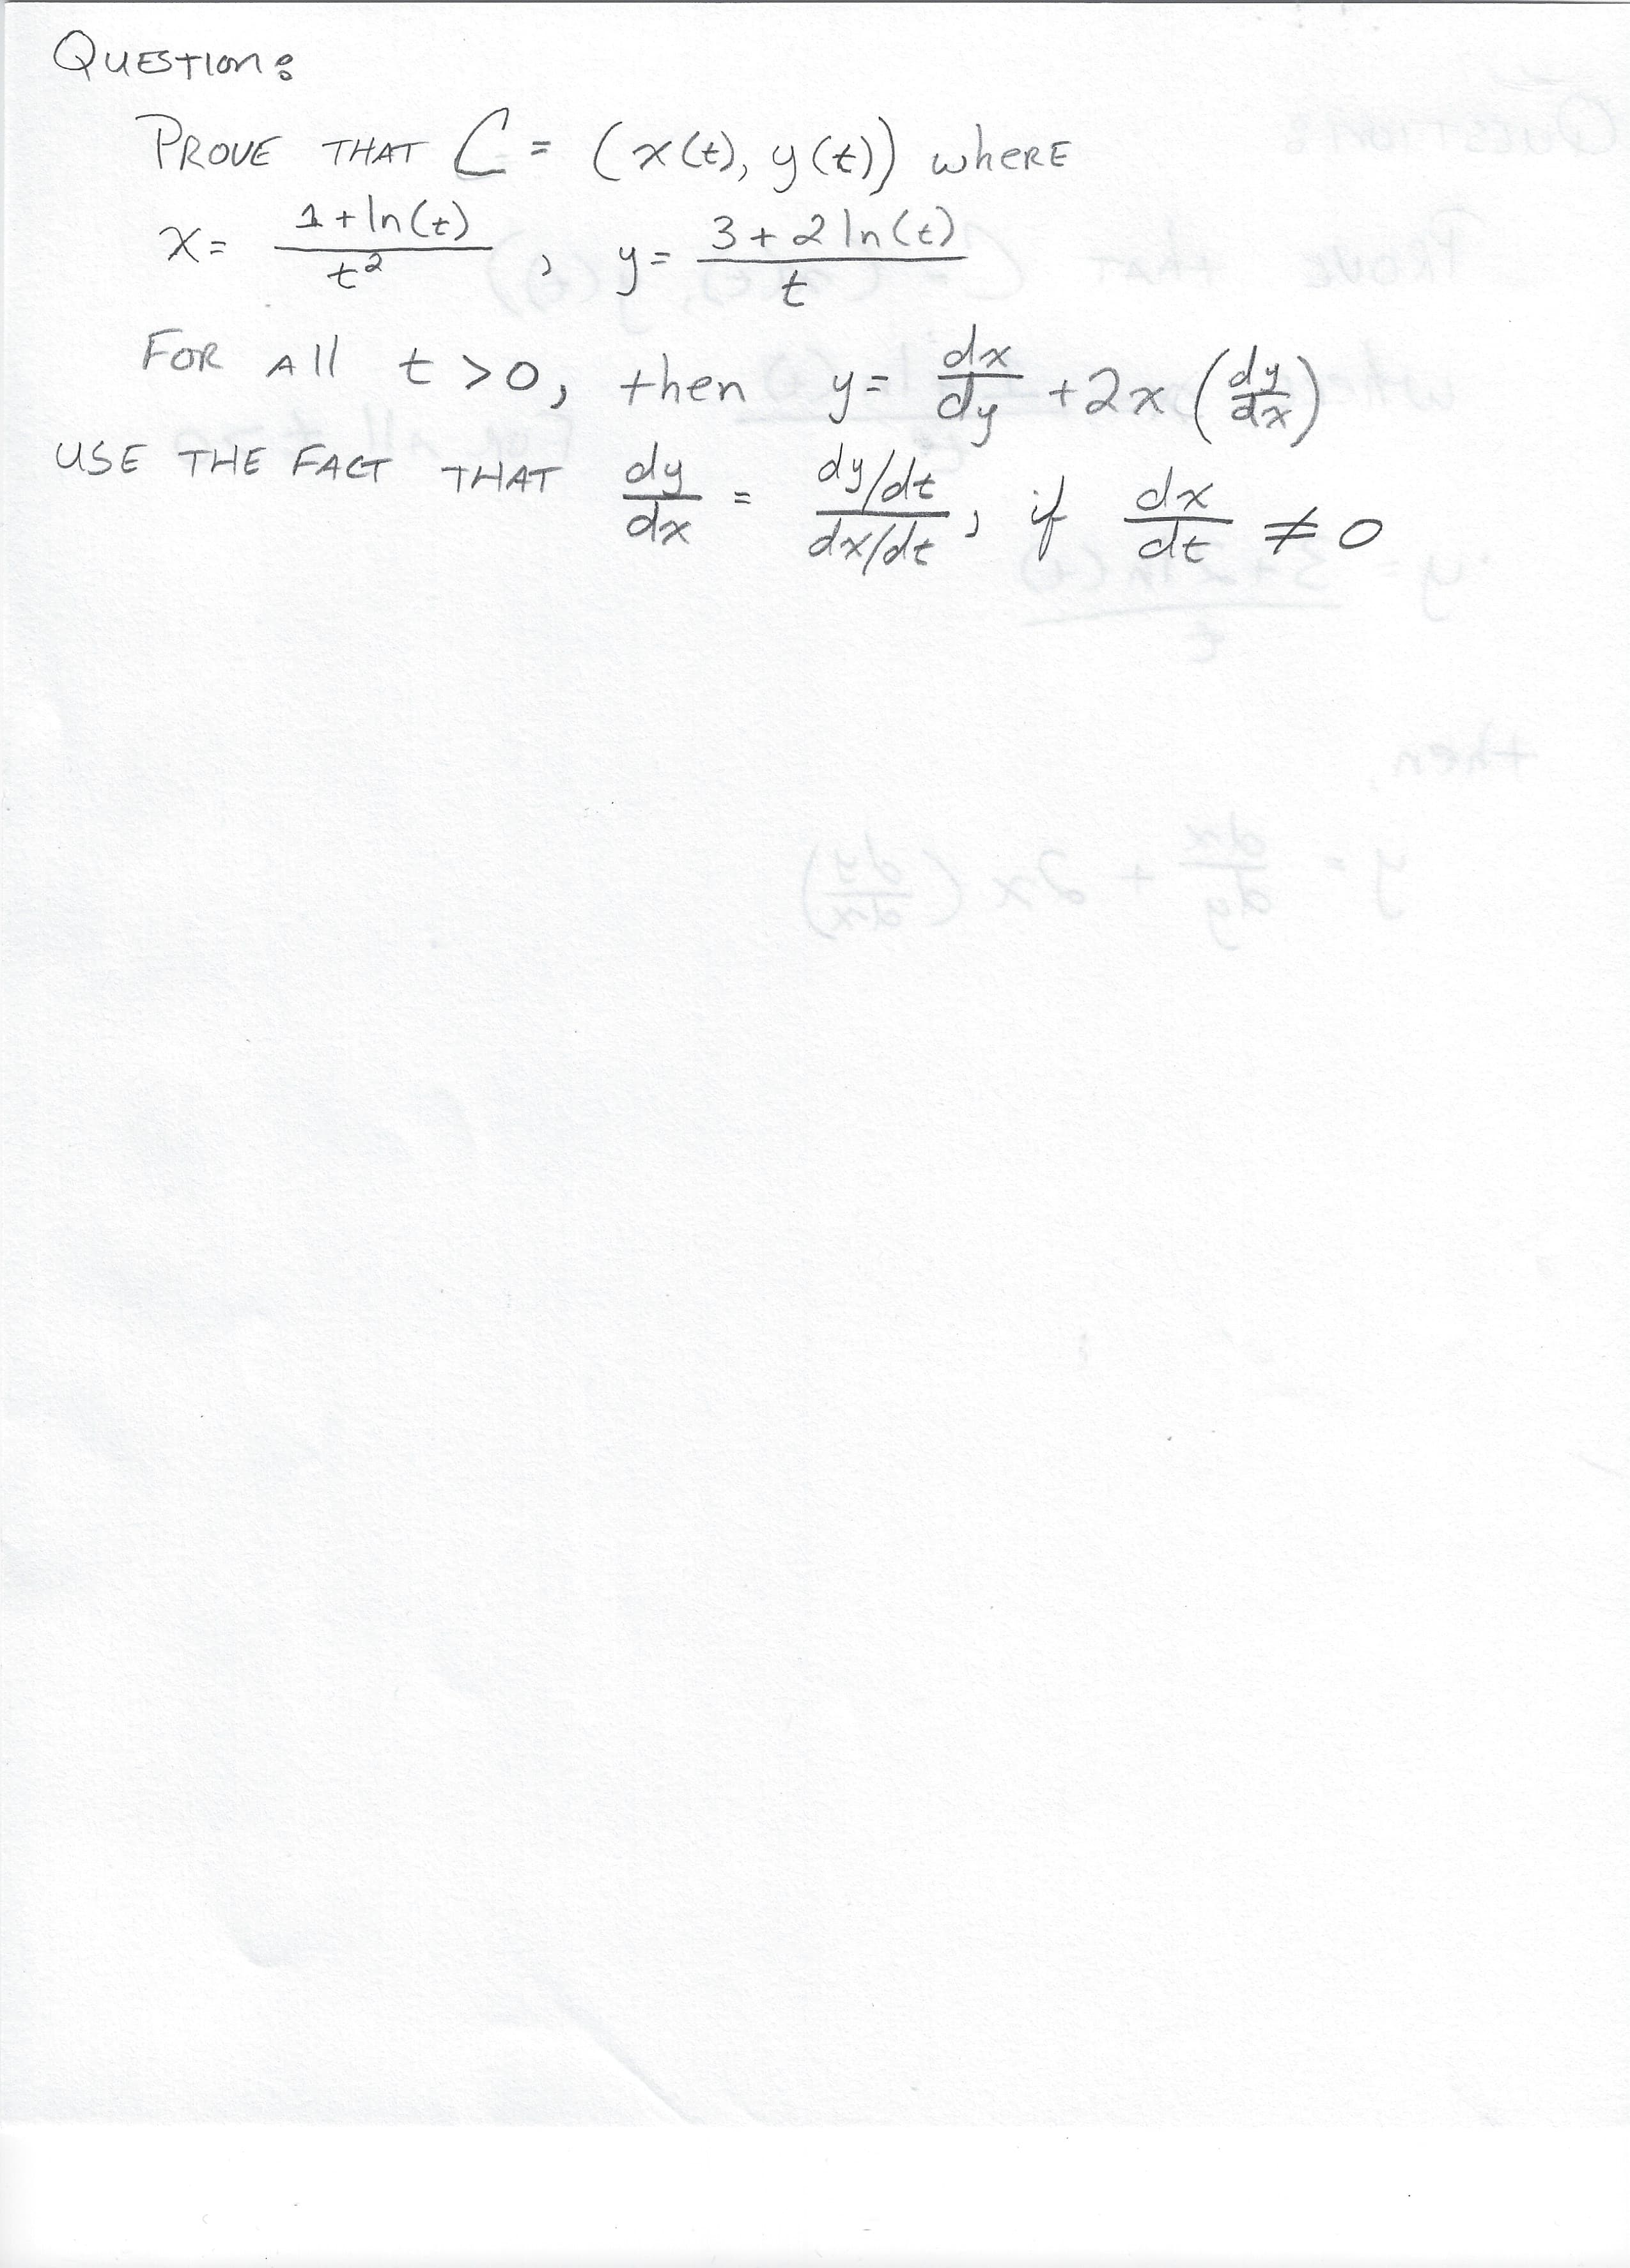 QUESTIONS
PROVE THAT C - (xCe), y (t) wheRE
1+In Ce)
3+2 In (e)
y=
FOR All t >o, then
y
dx
+2x%:
dy
